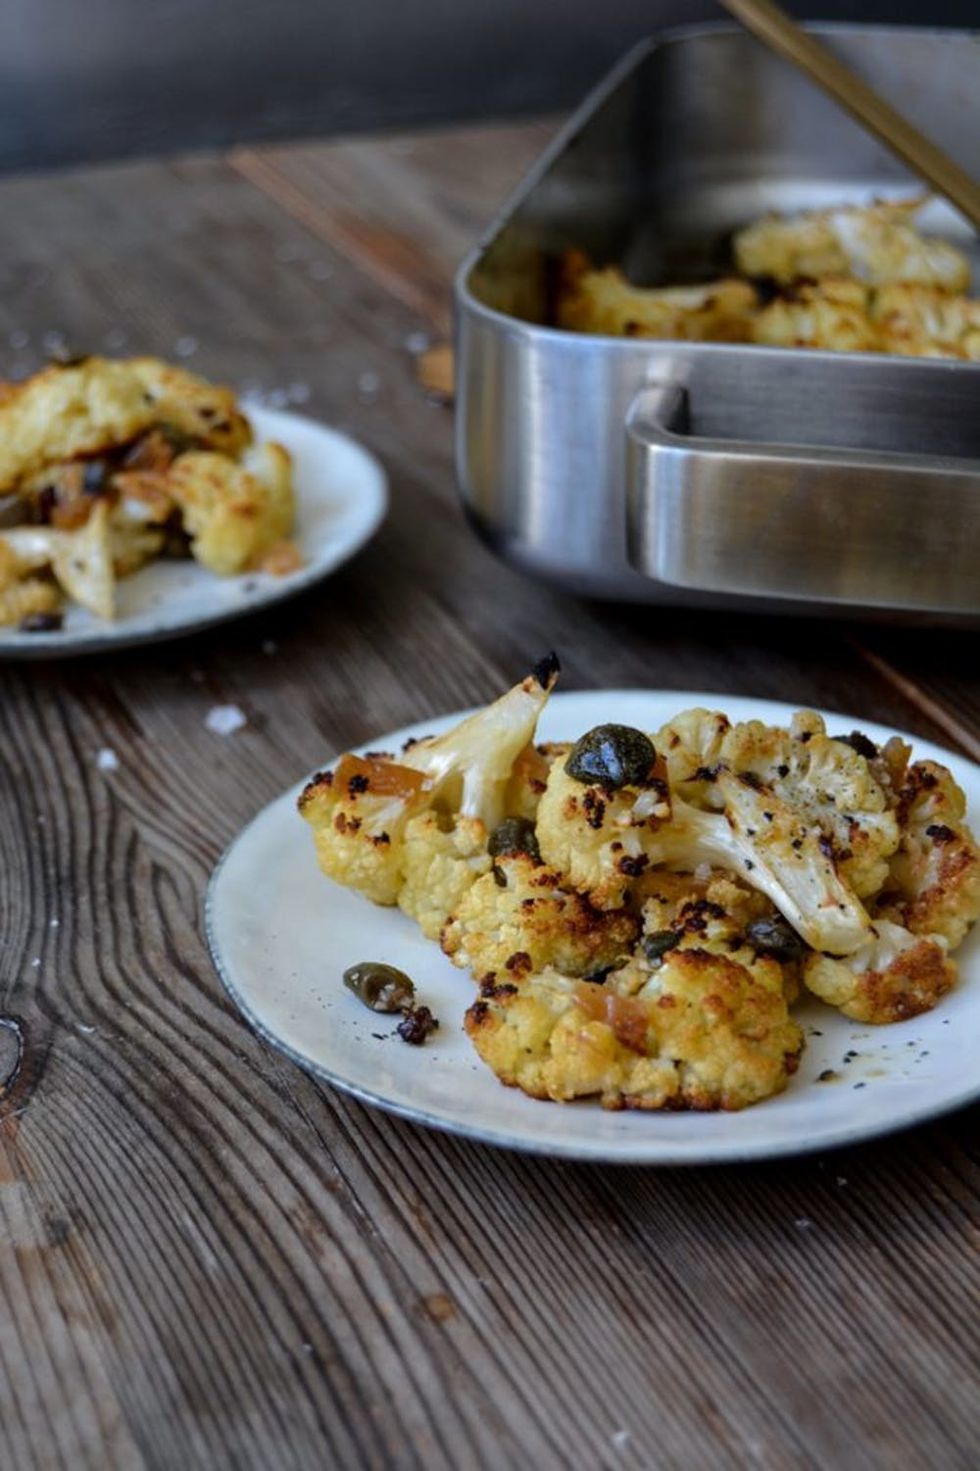 Roasted Cauliflower With Capers and Preserved Lemons